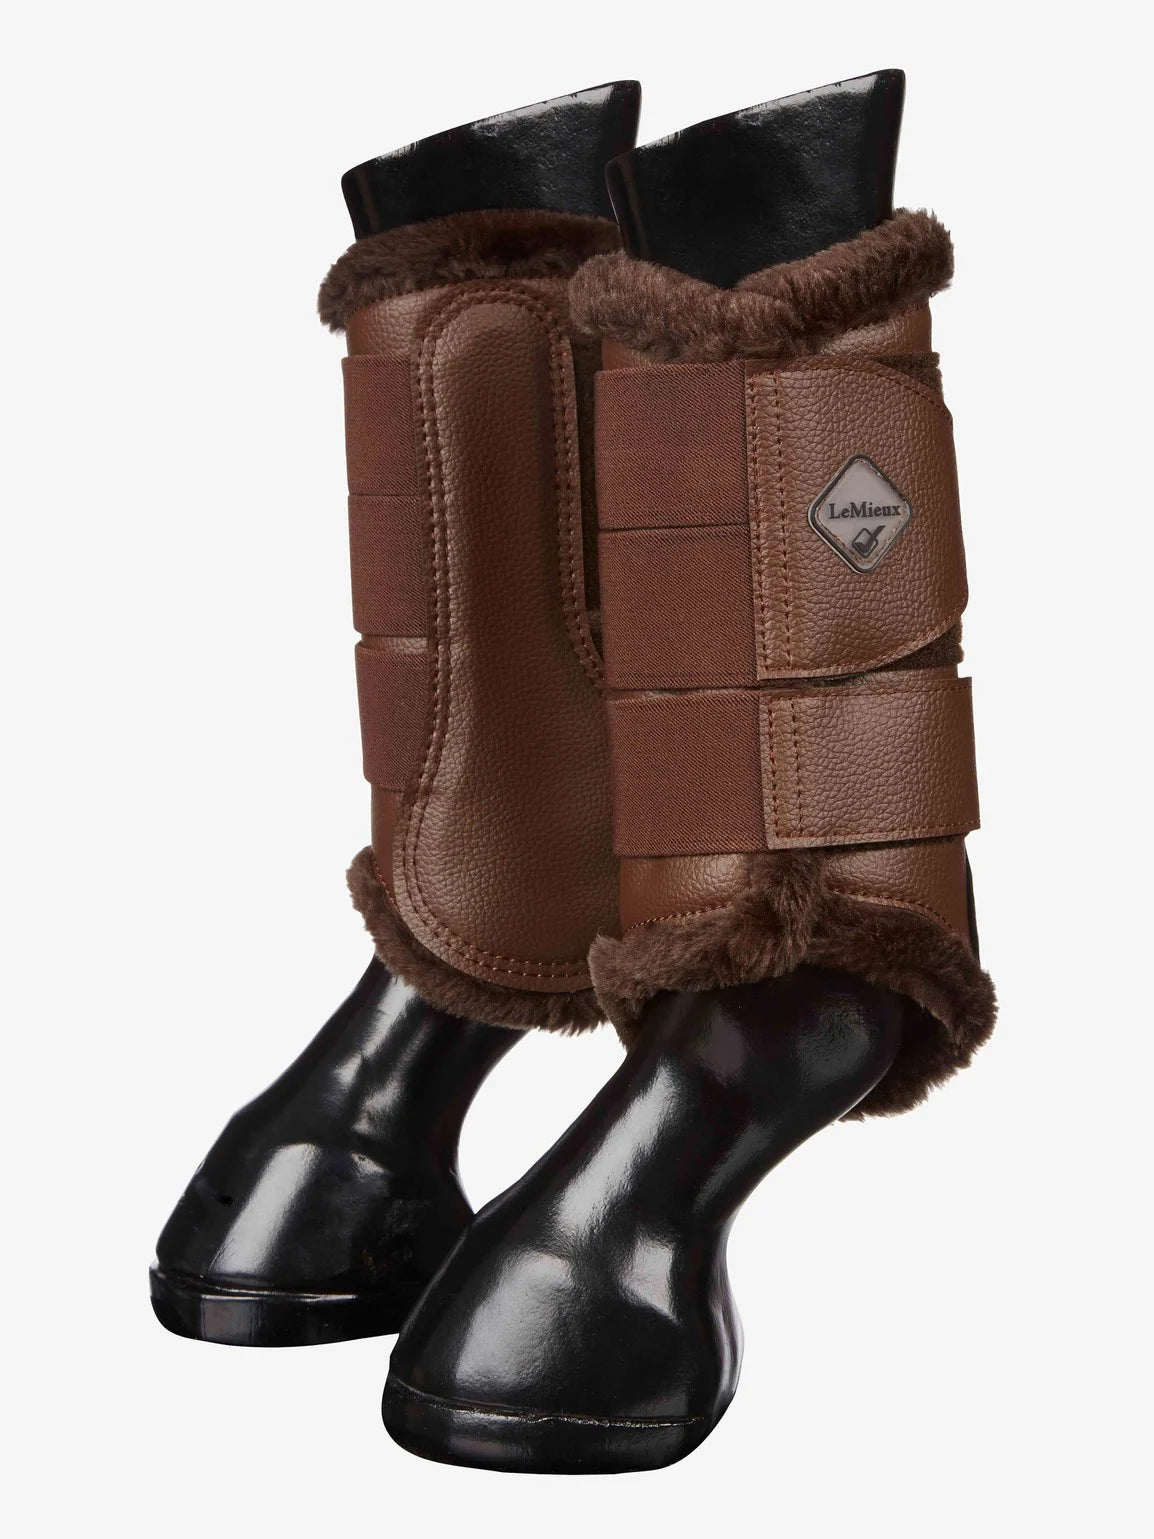 LeMieux Brown Fleece Lined Brushing Boots